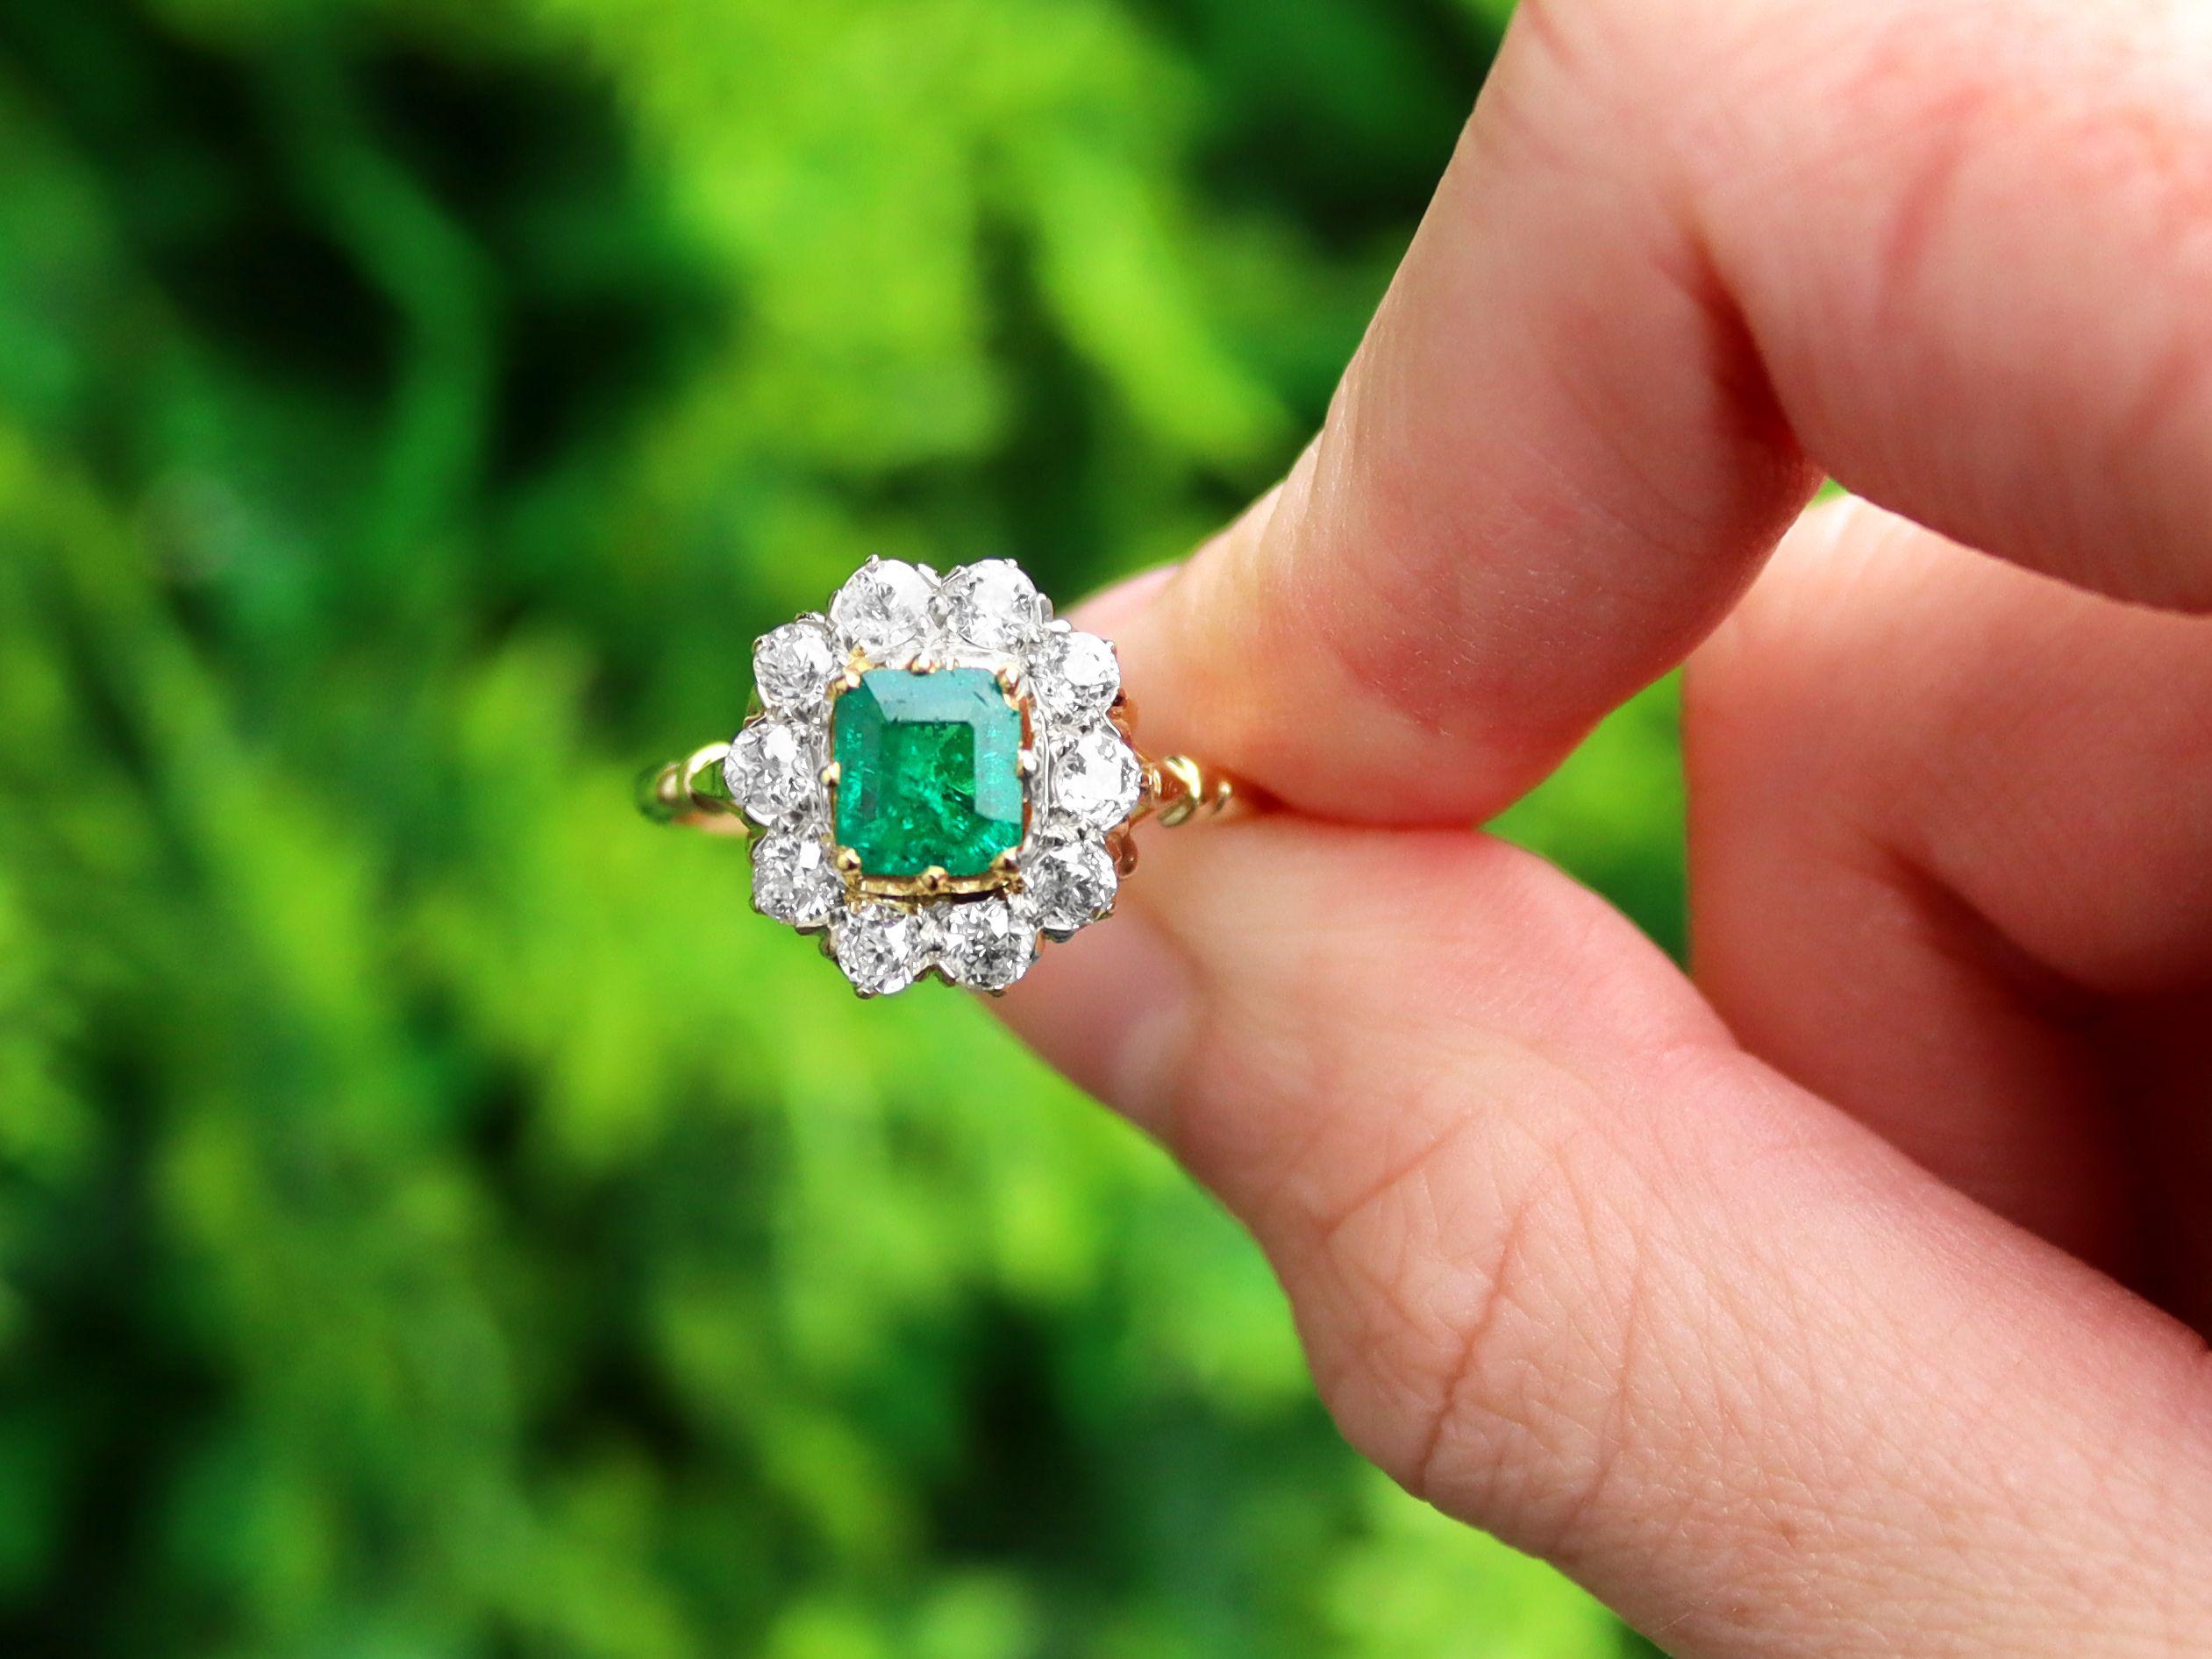 A stunning, fine and impressive 0.82 carat emerald and 1.00 carat diamond, 18 carat yellow gold dress ring; part of our diverse vintage jewellery and estate jewelry collections

This stunning, fine and impressive vintage emerald ring has been